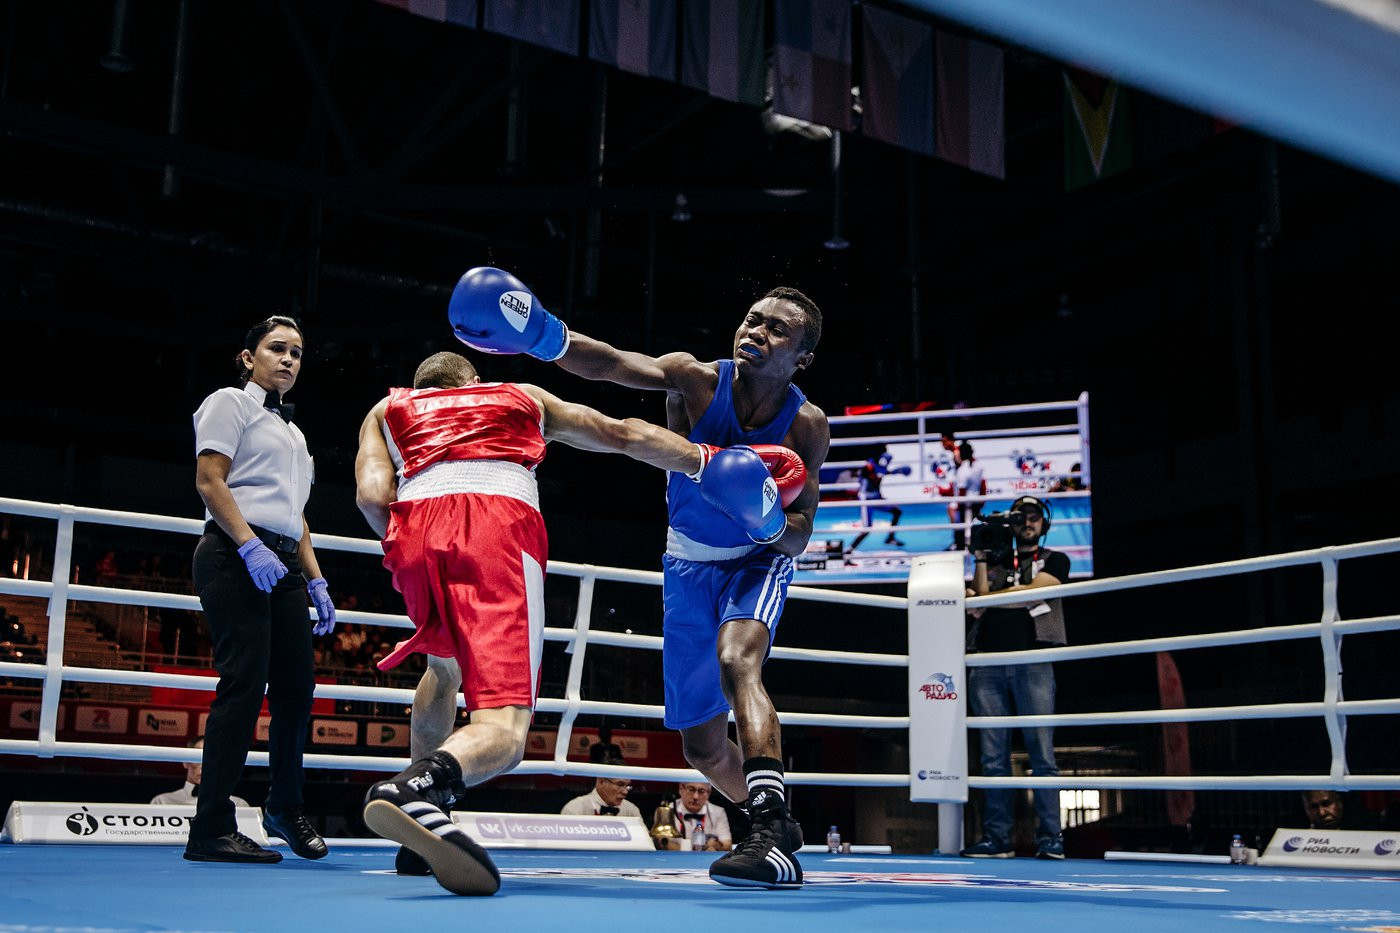 Mohamed Flissi of Algeria, in red,defeated Doudou Ilunga Kabange of the Democratic Republic of Congo in the first bout ©Yekaterinburg 2019